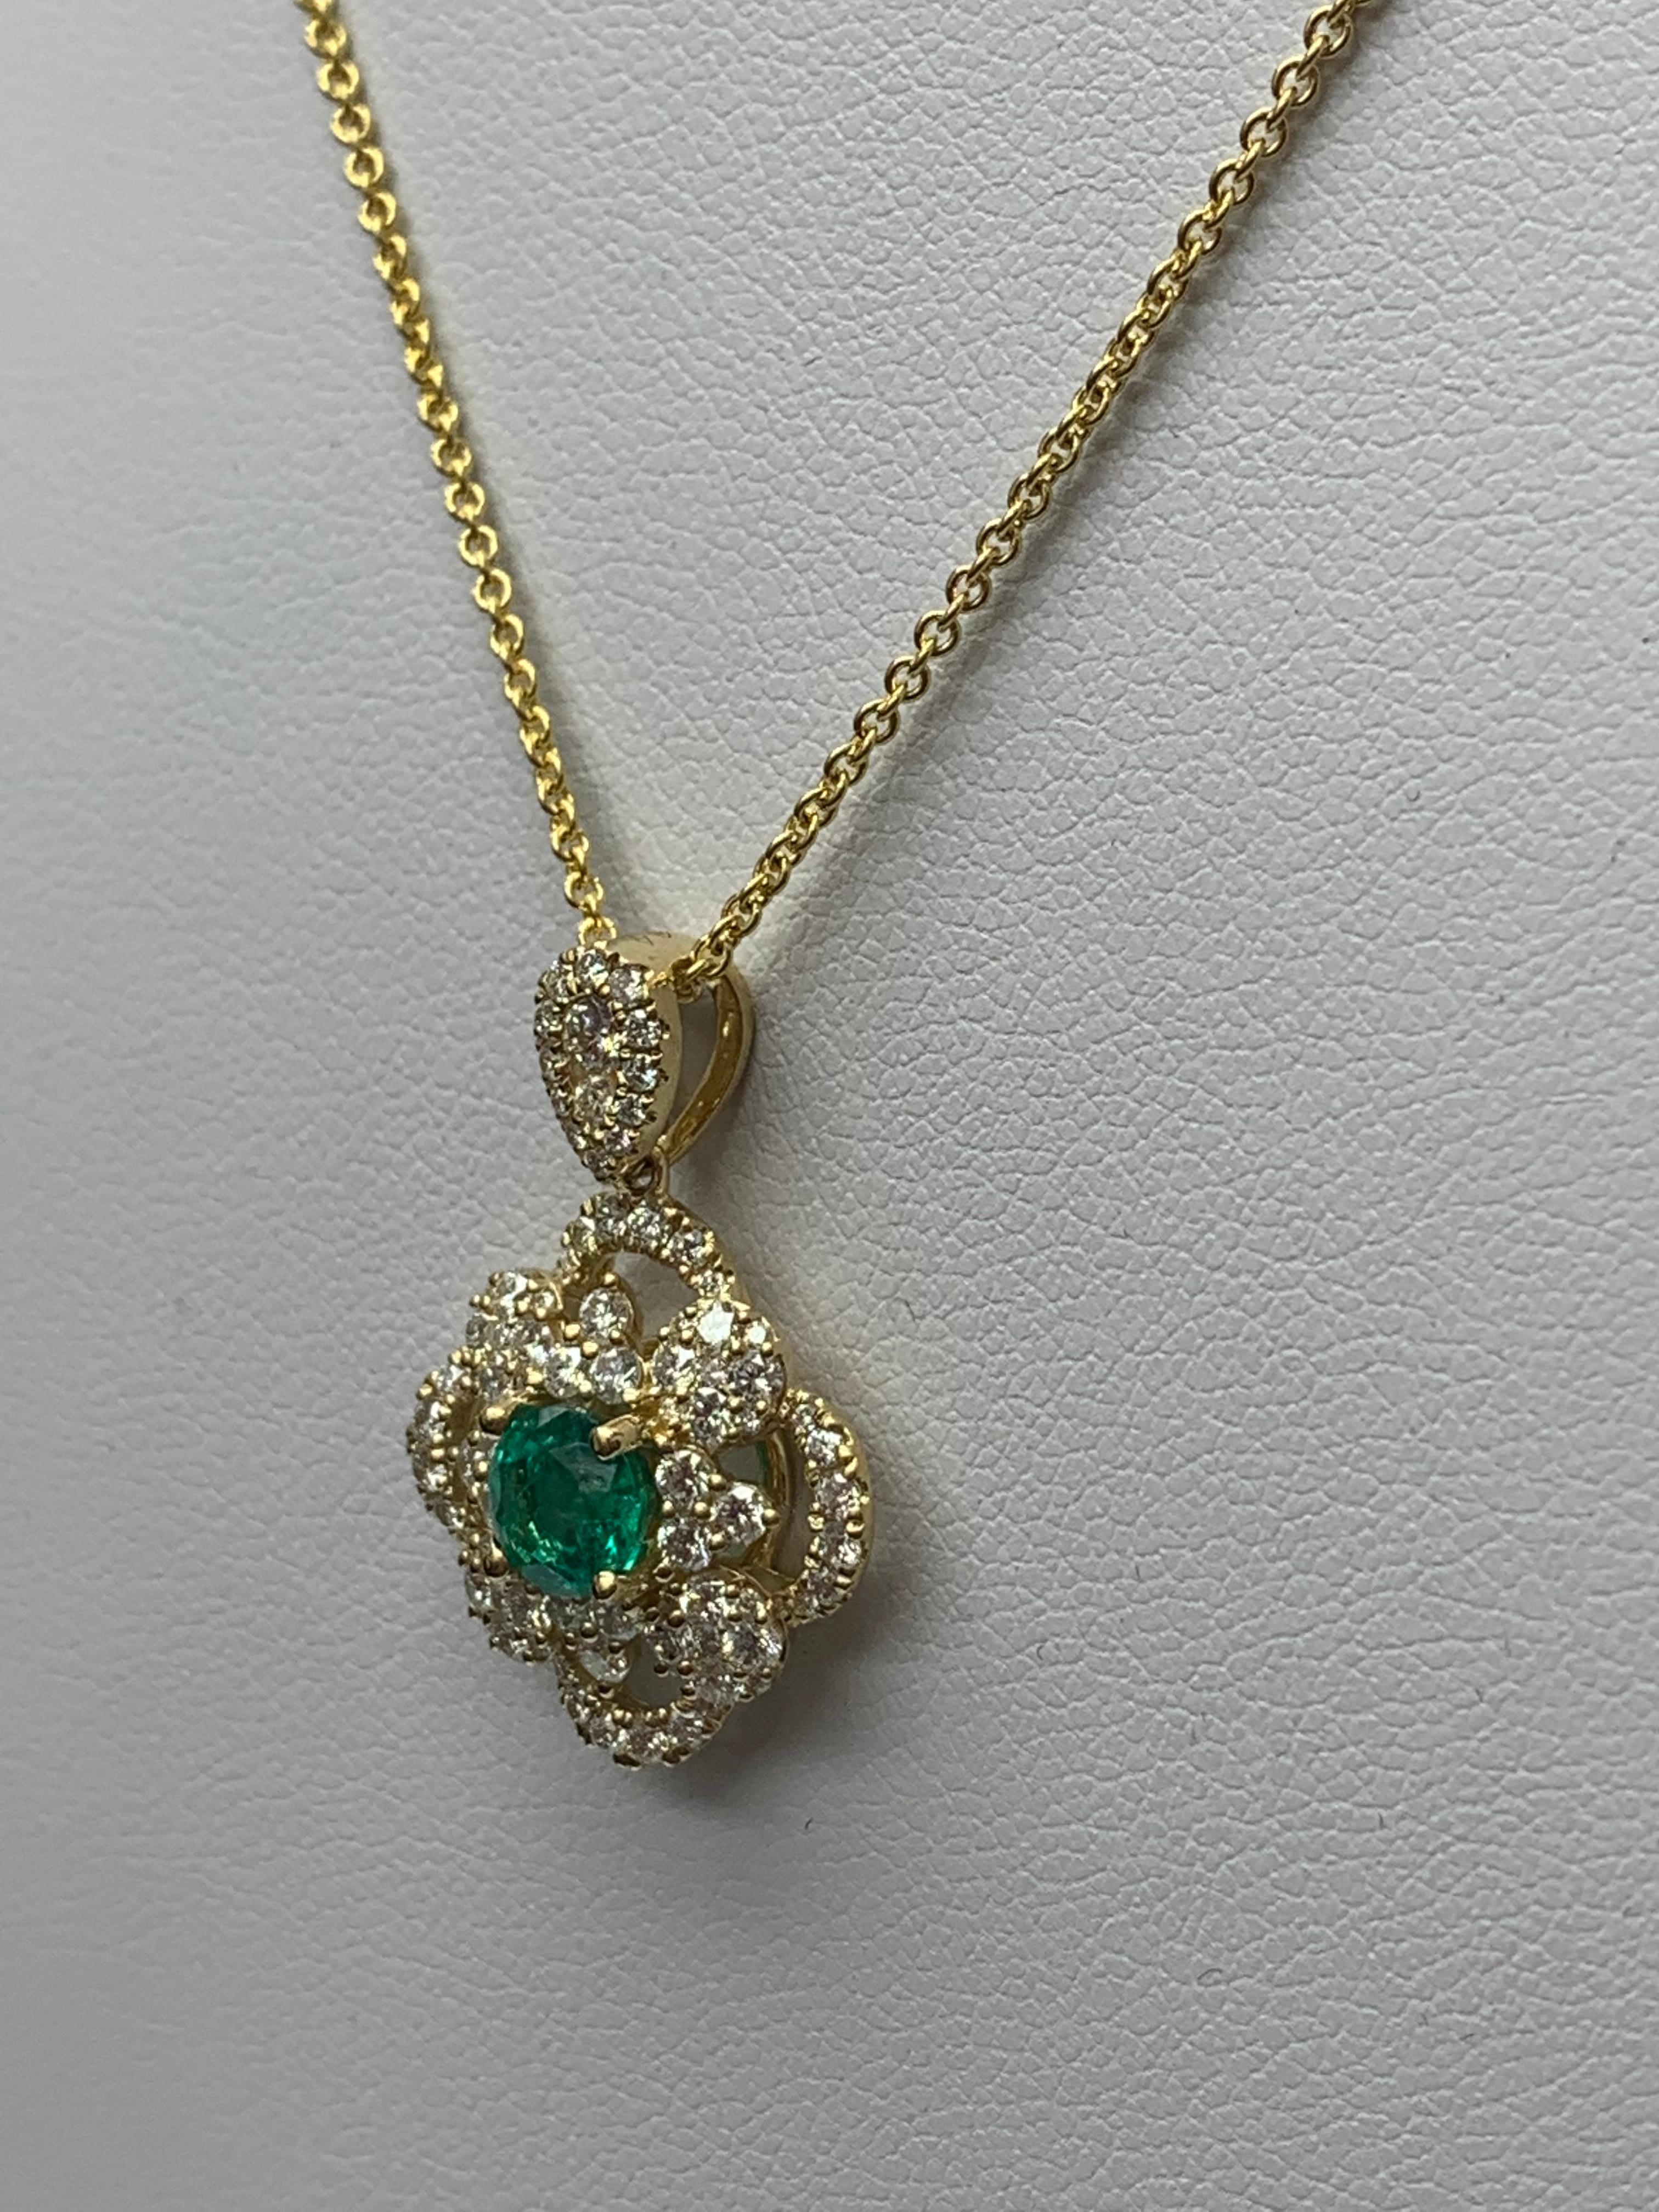 0.67 Carat Round Cut Emerald and Diamond Pendant Necklace in 18K Yellow Gold For Sale 3